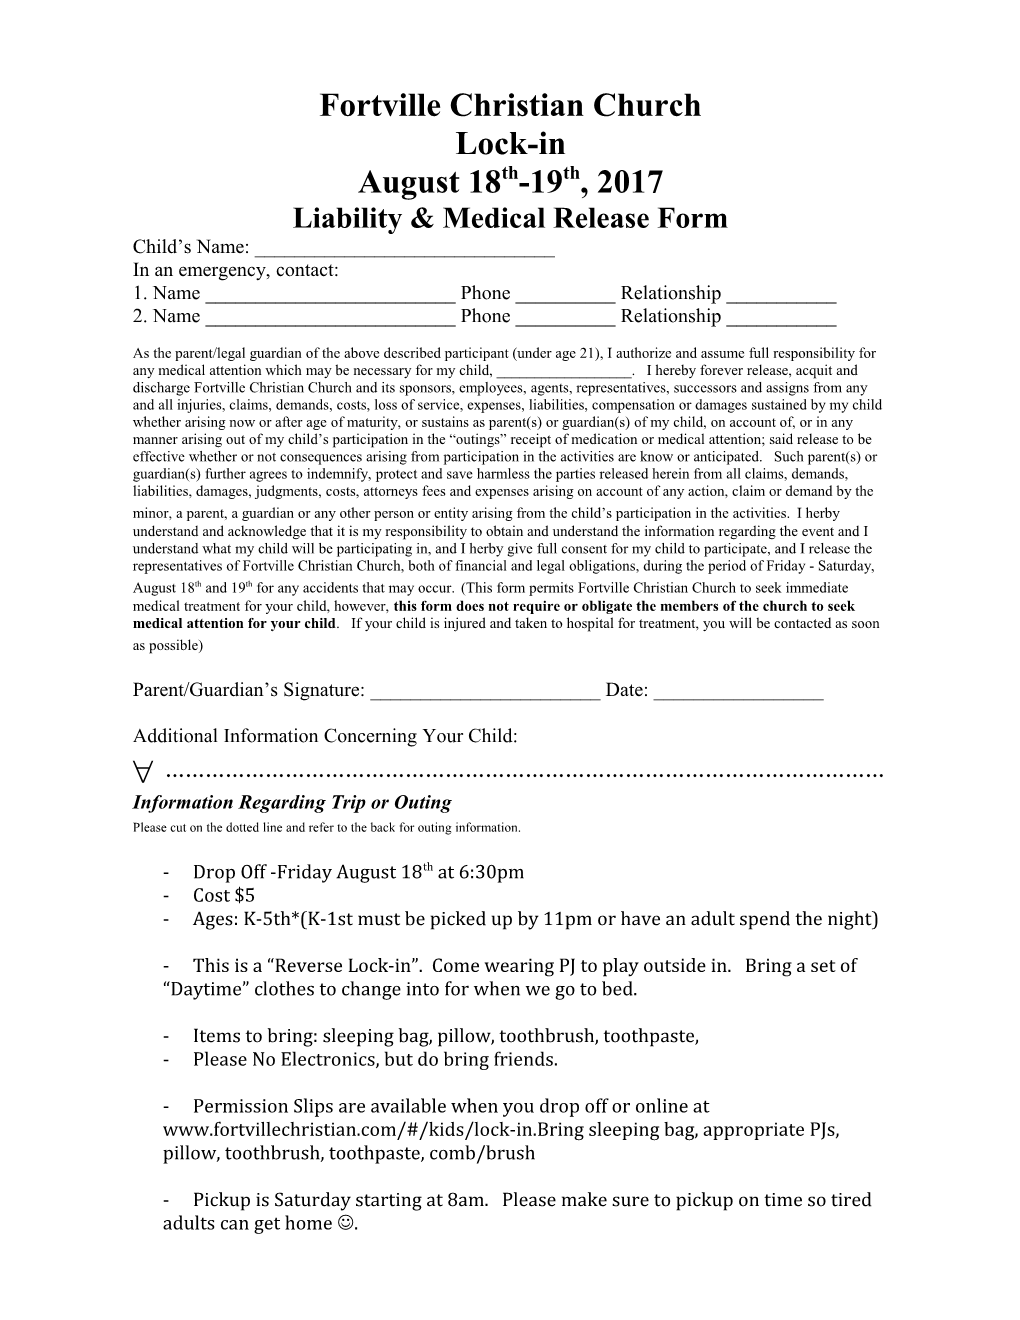 Liability & Medical Release Form